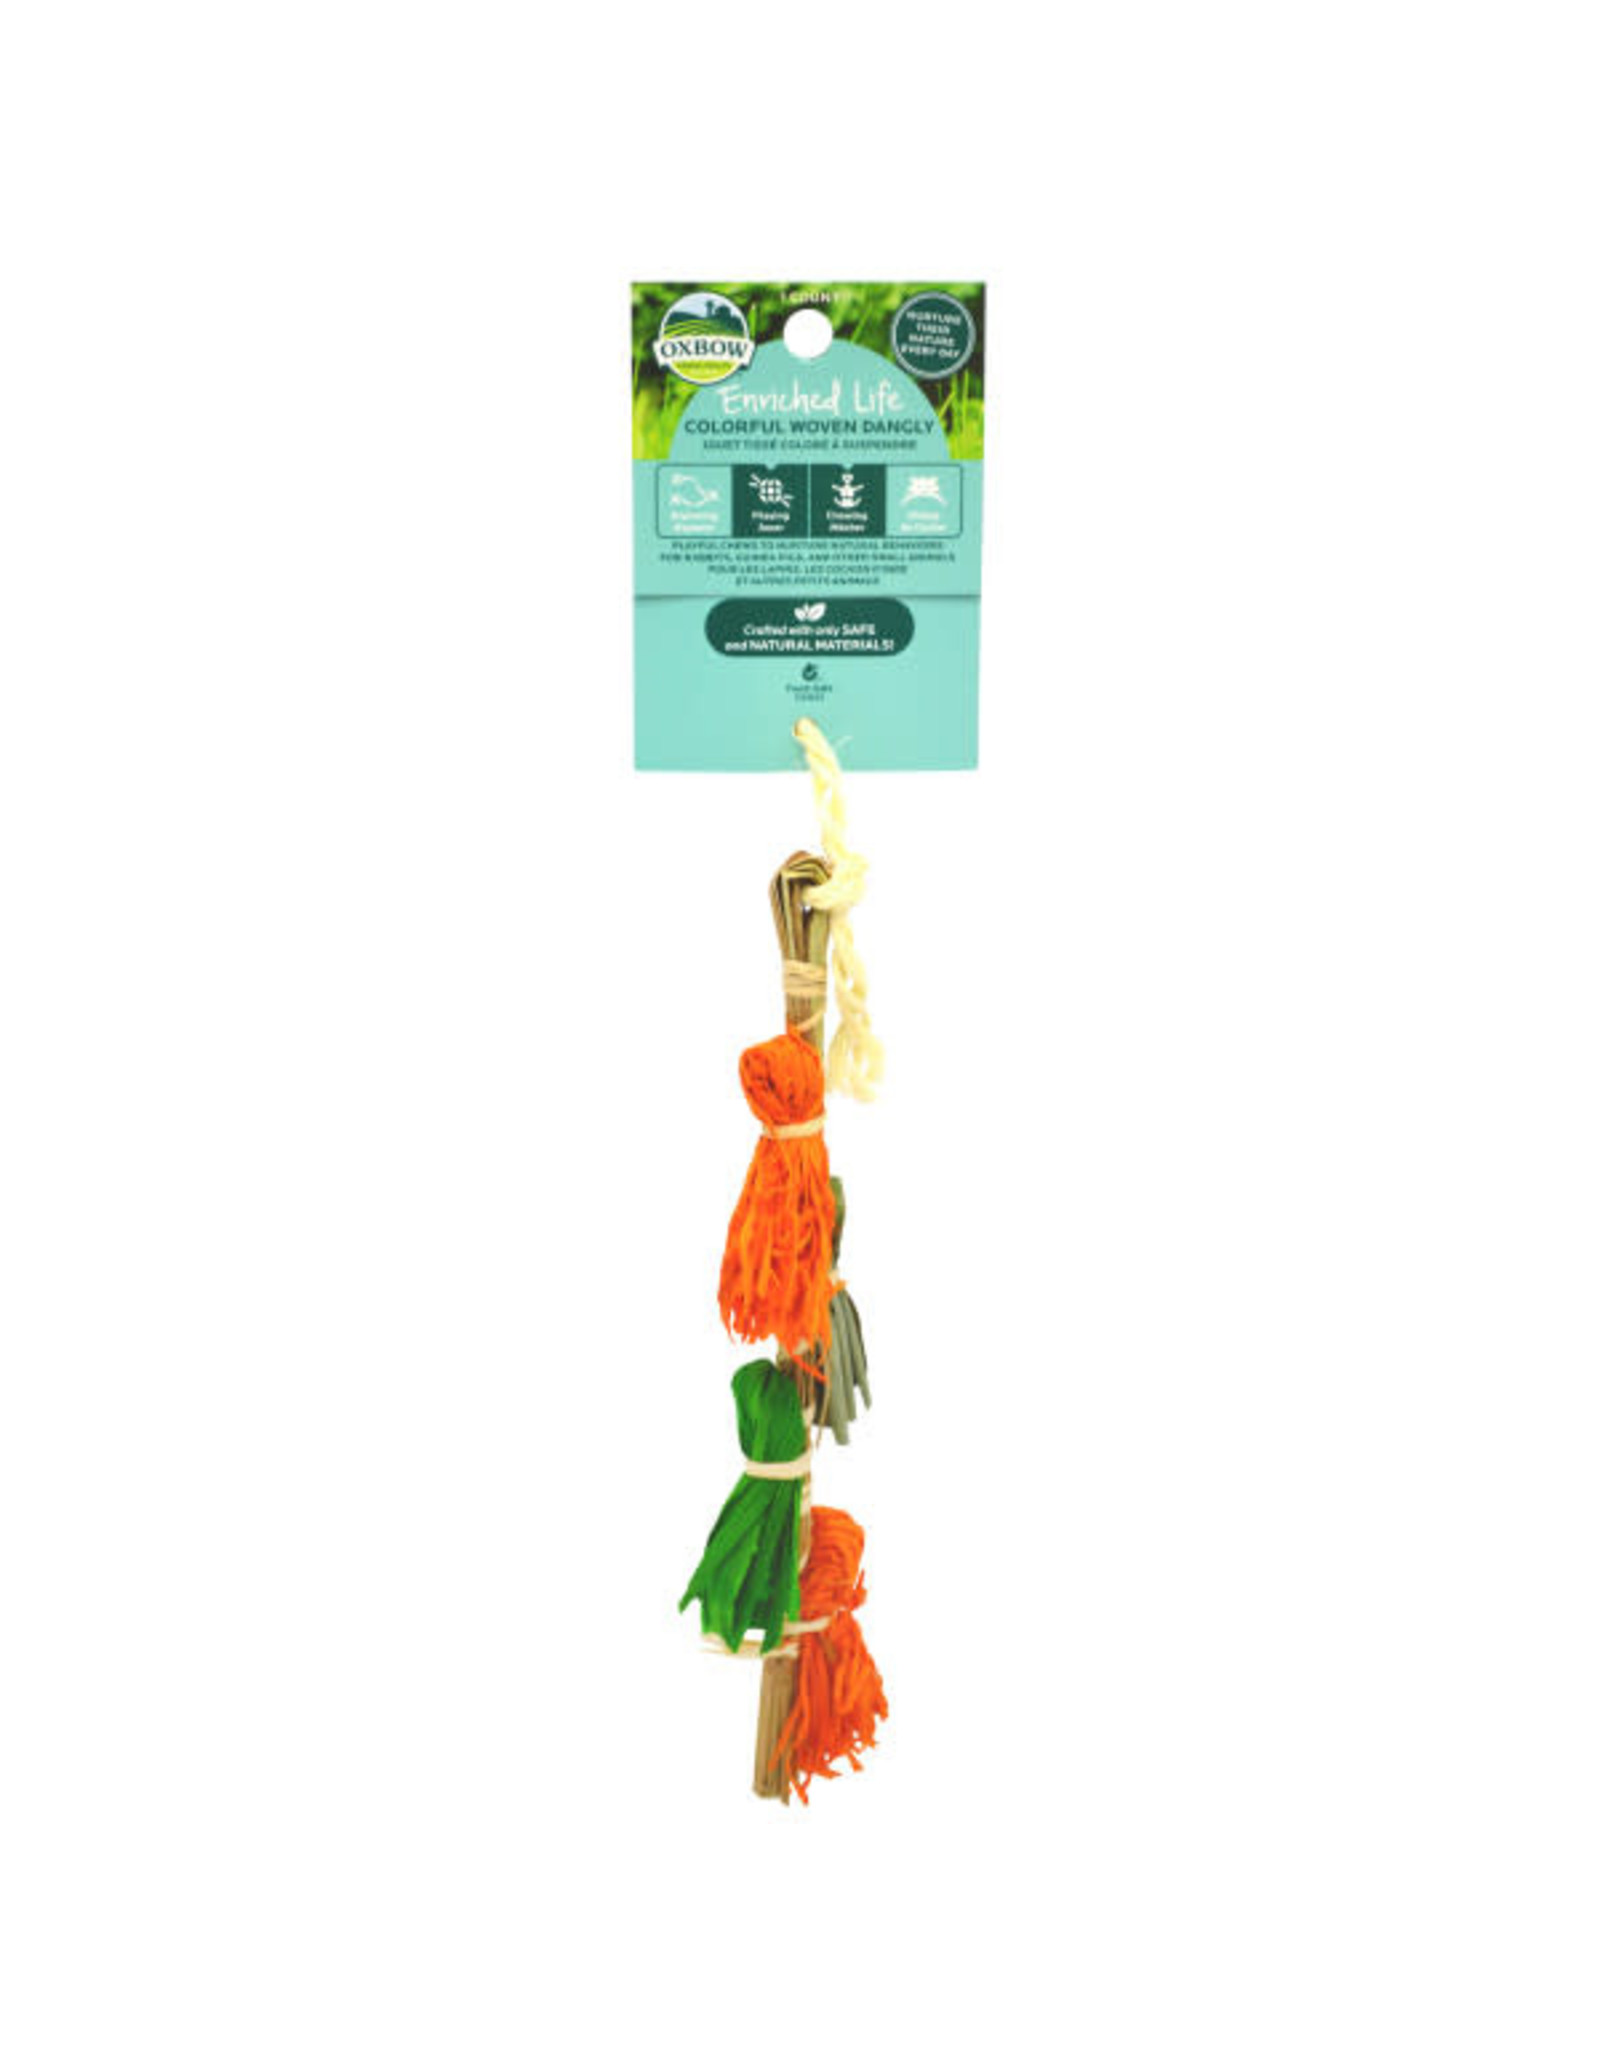 Oxbow Oxbow Enriched Life Colorful Woven Dangly